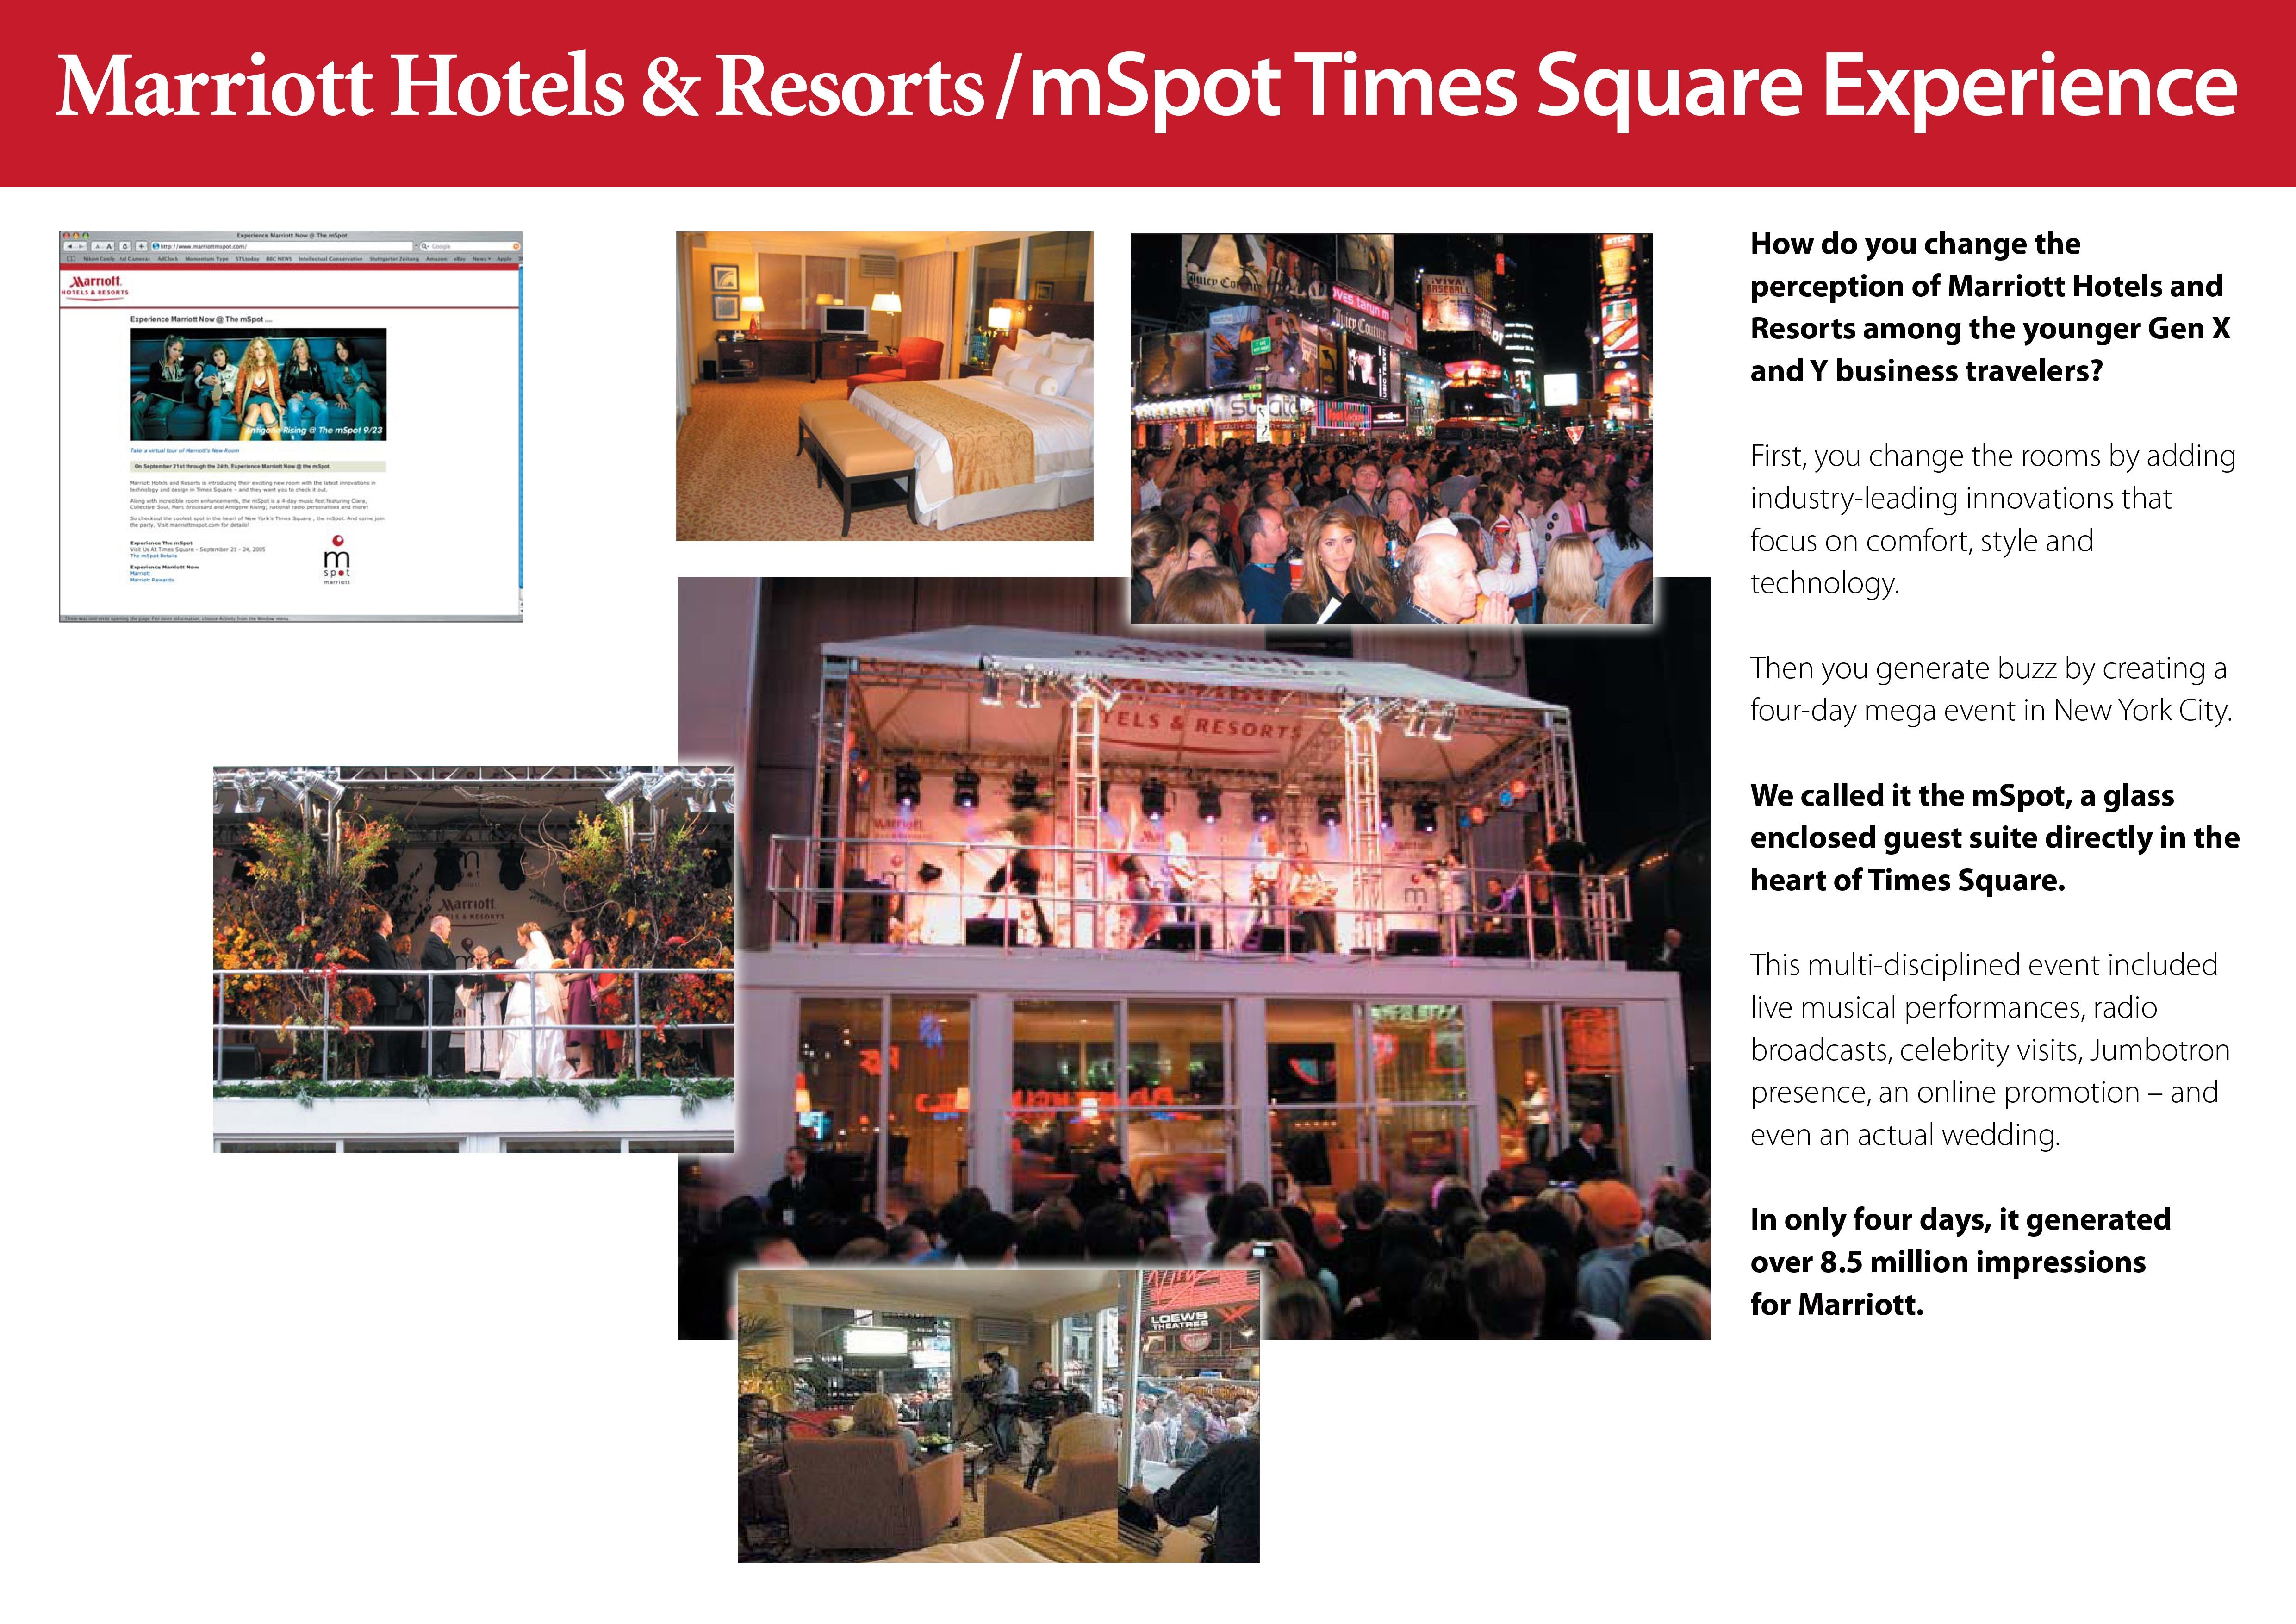 The Marriott mSpot Times Square Experience